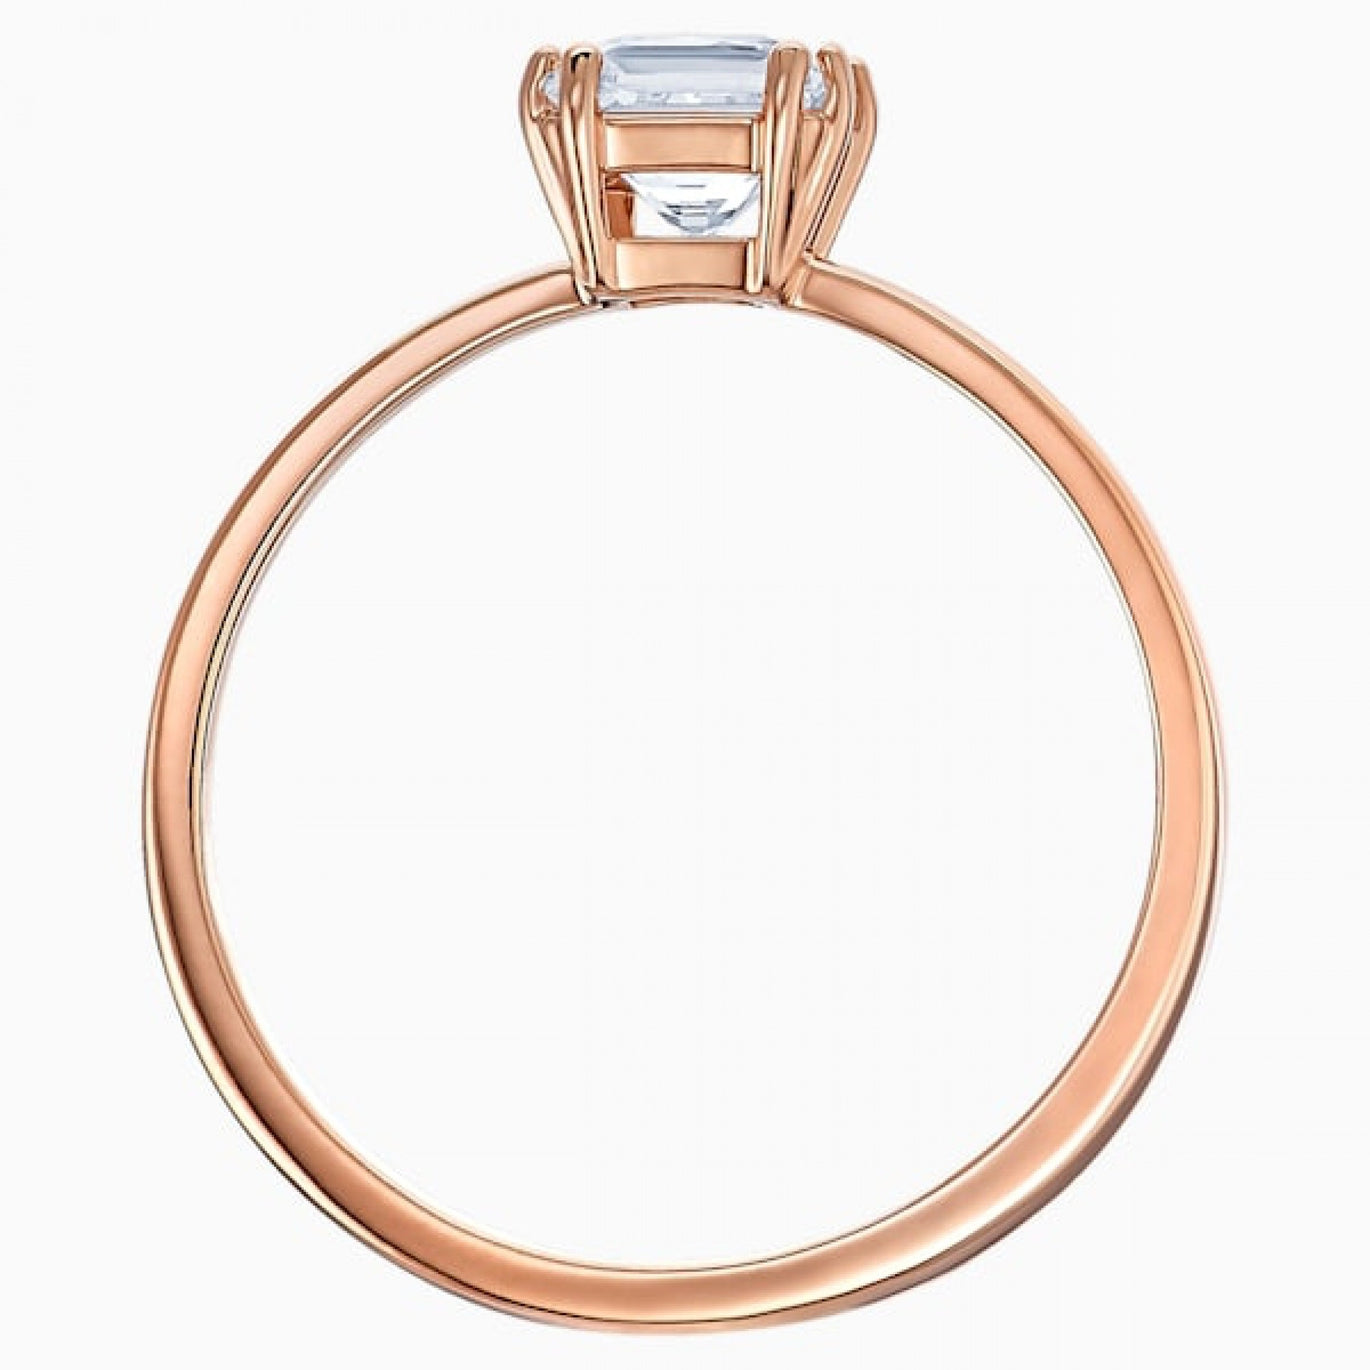 Swarovski Attract Ring, Rose-Gold tone plated